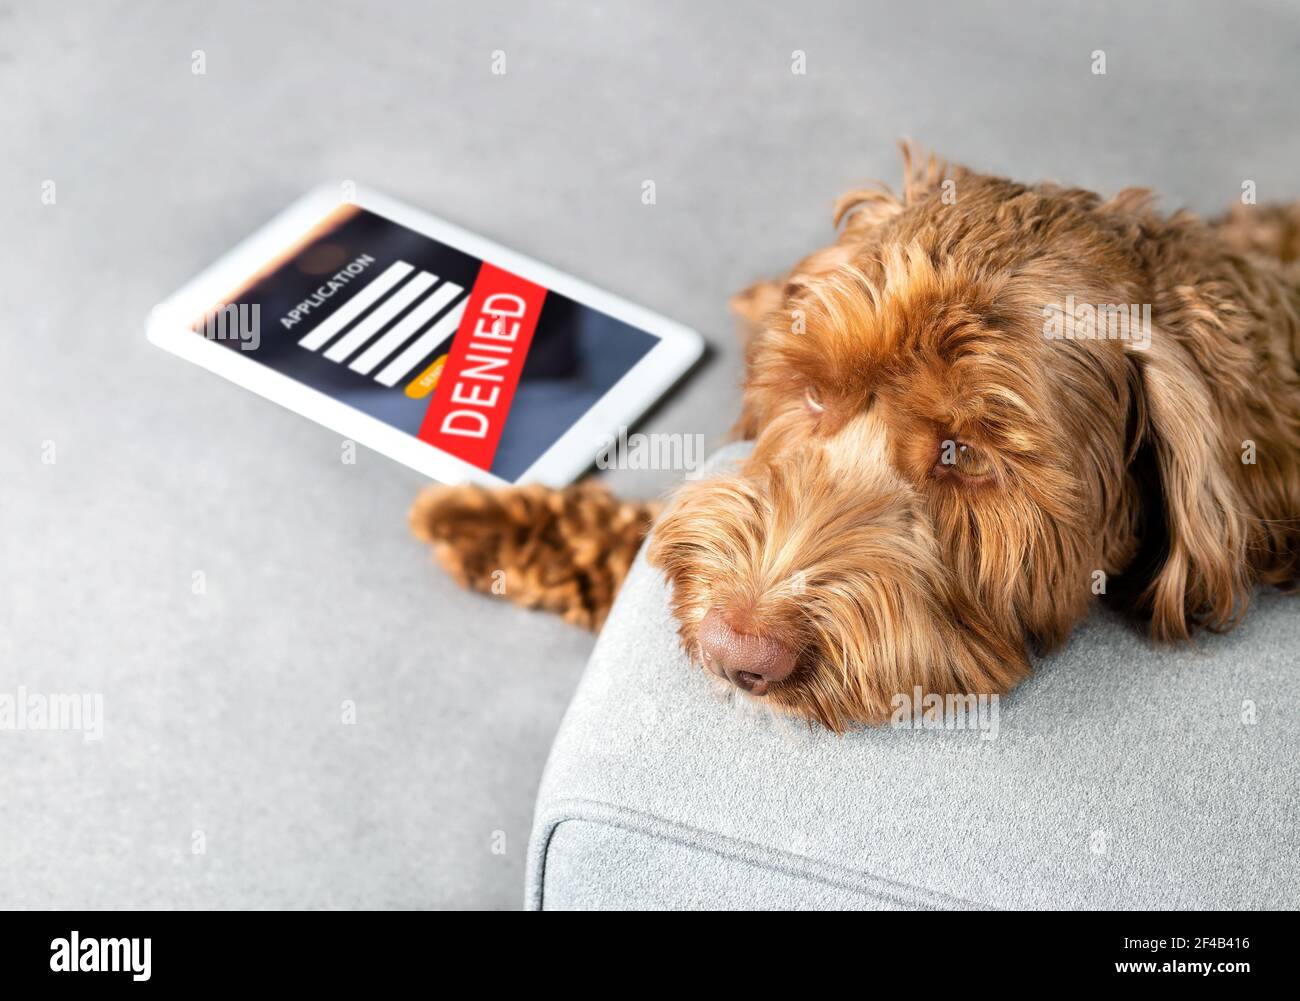 Sad Labradoodle dog with application denied screen on tablet. Pet themed concept for rejection of applications such as credit card, loan, mortgage. Stock Photo